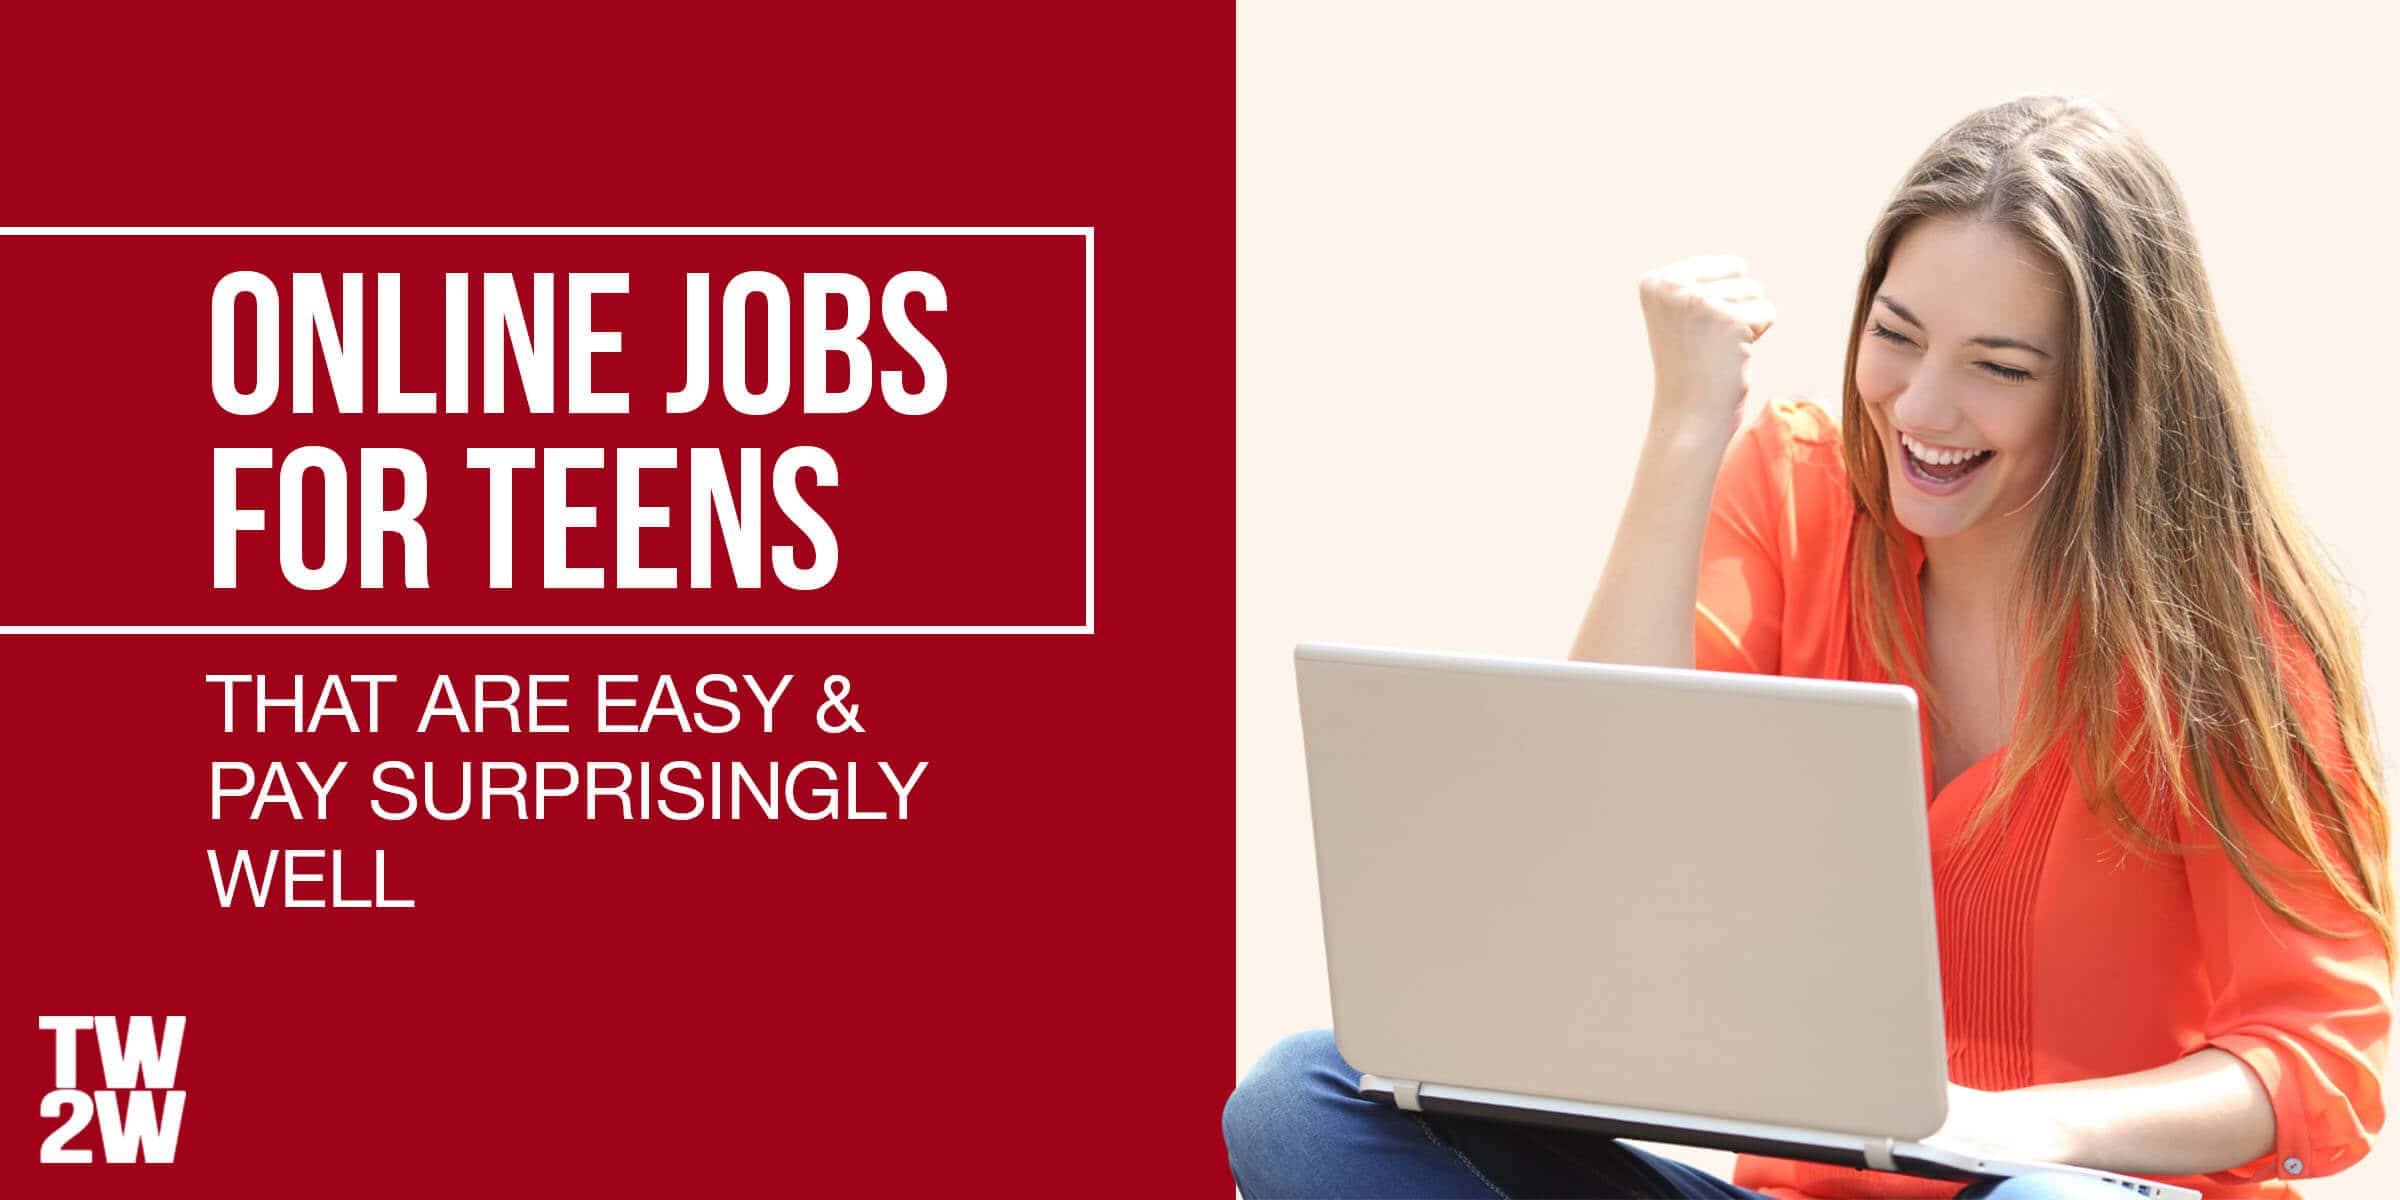 14 Types of Work-From-Home Jobs That Don't Require a Degree